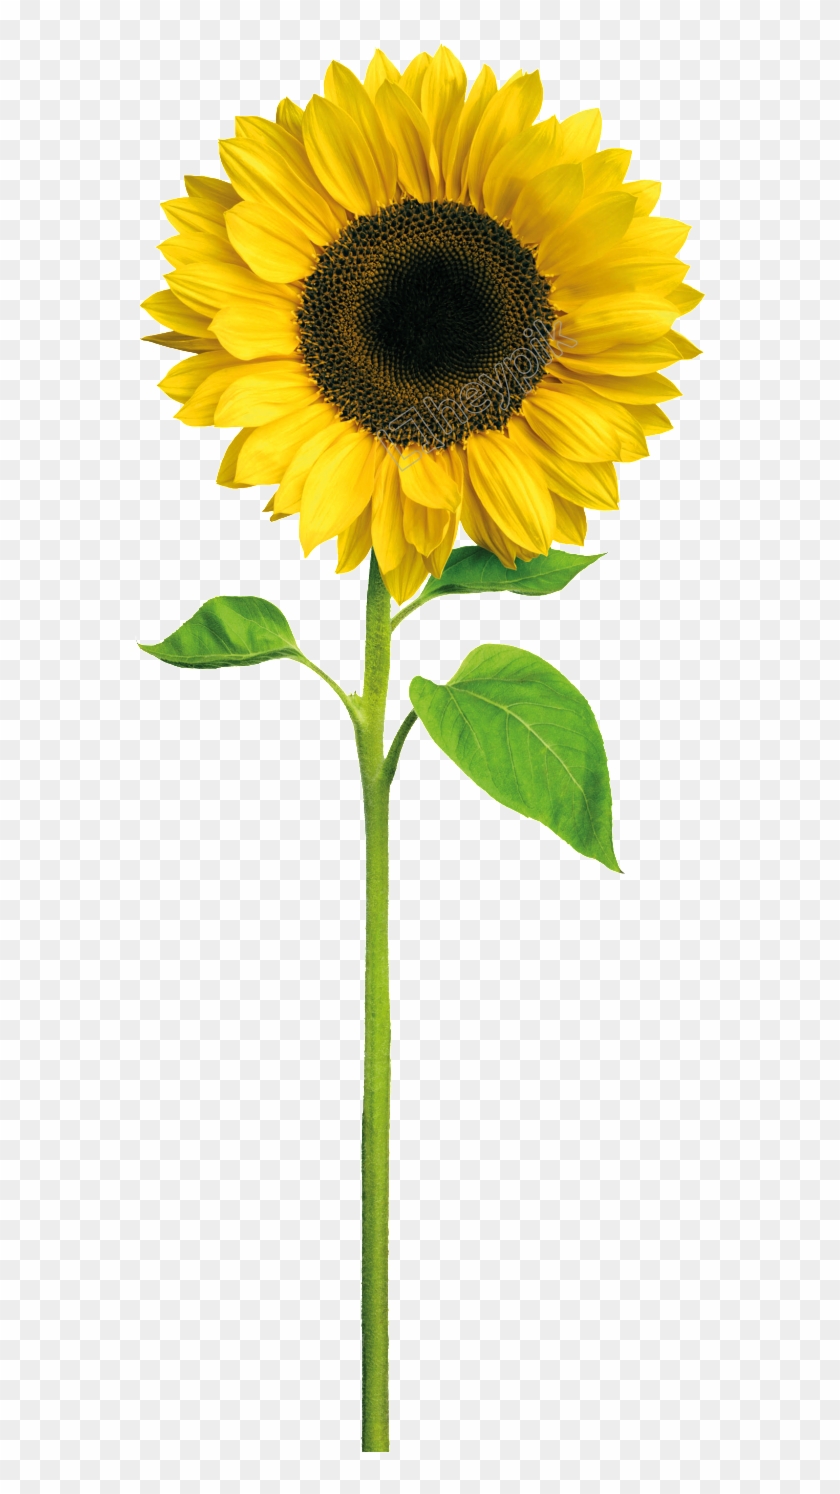 Sunflower Vector Image at Vectorified.com | Collection of ...